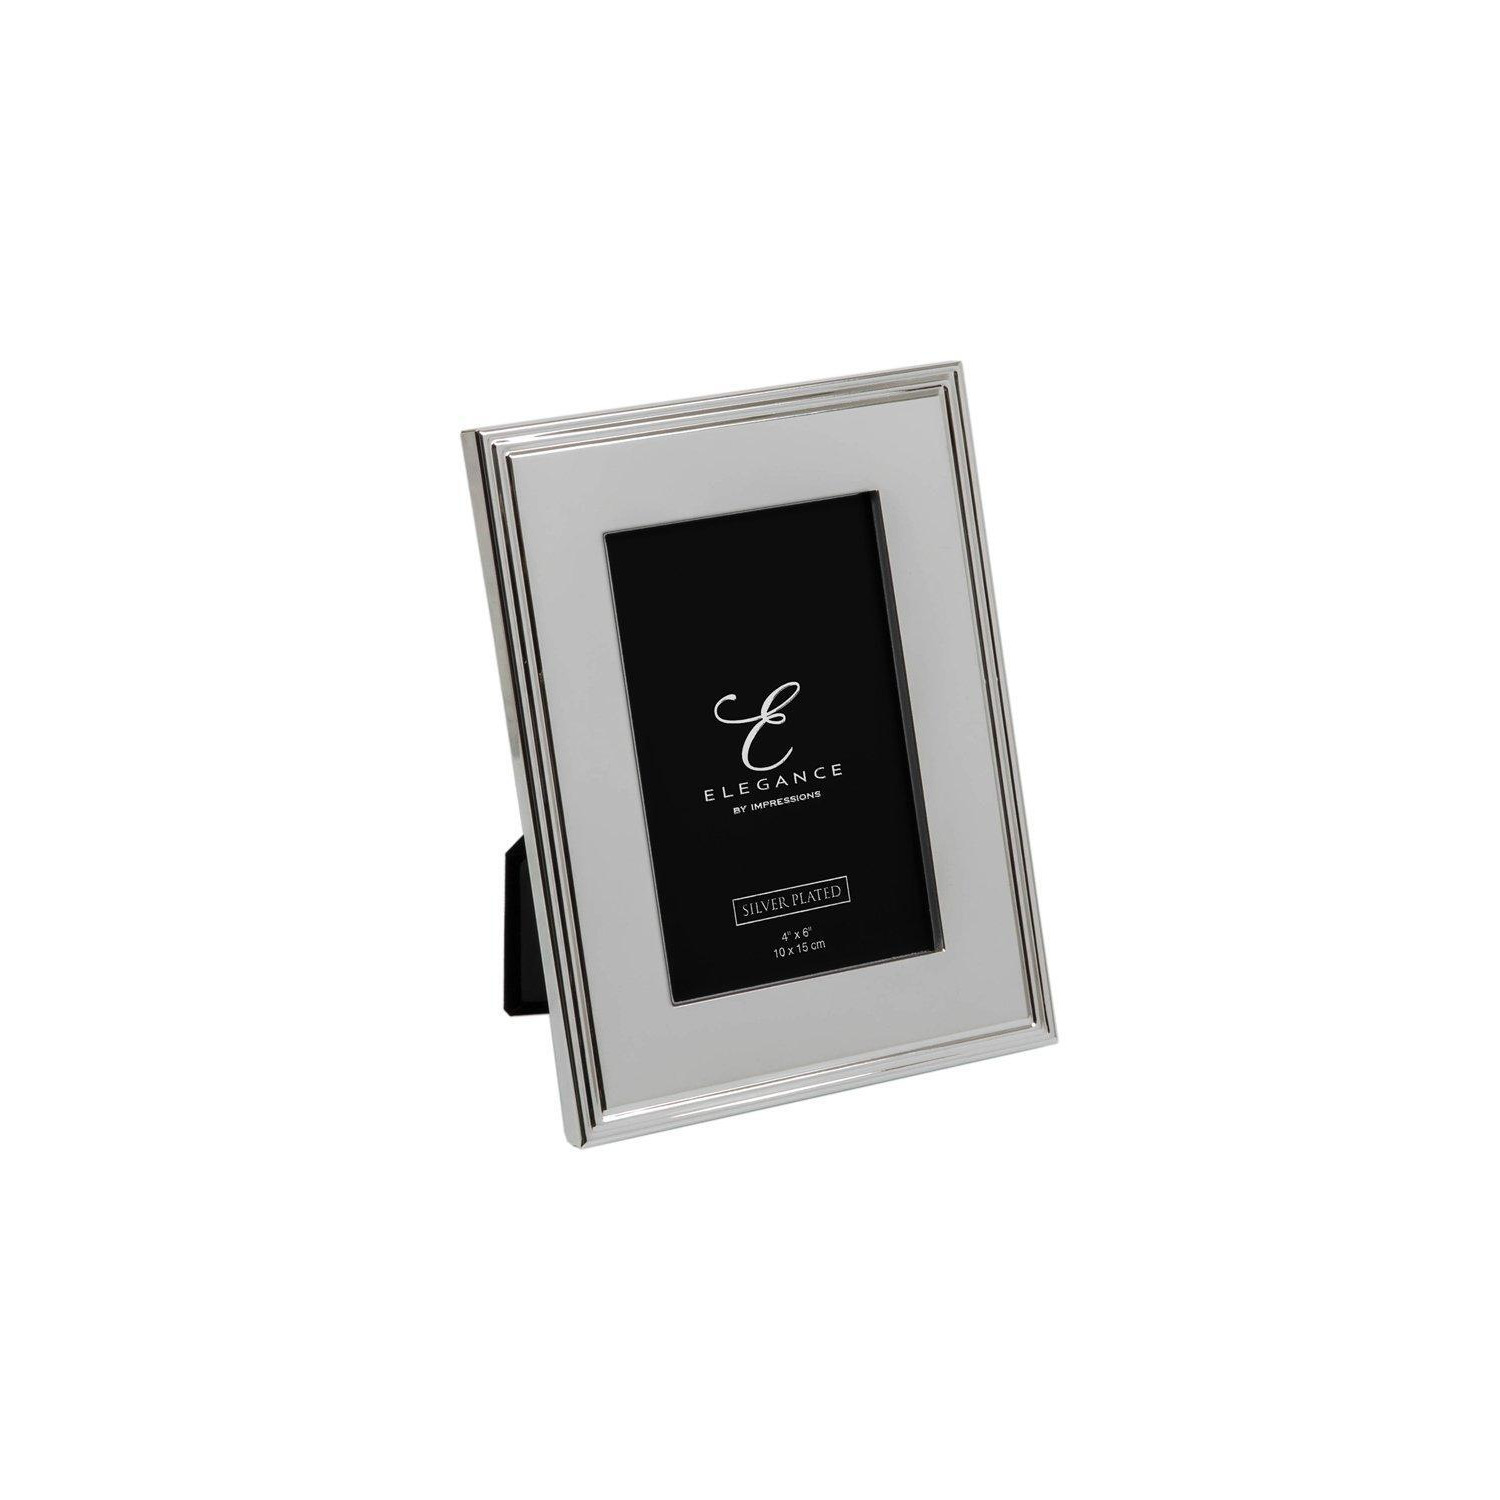 Silver Plated Rib Edge Frame Gift Boxed 4'' x 6'' - image 1